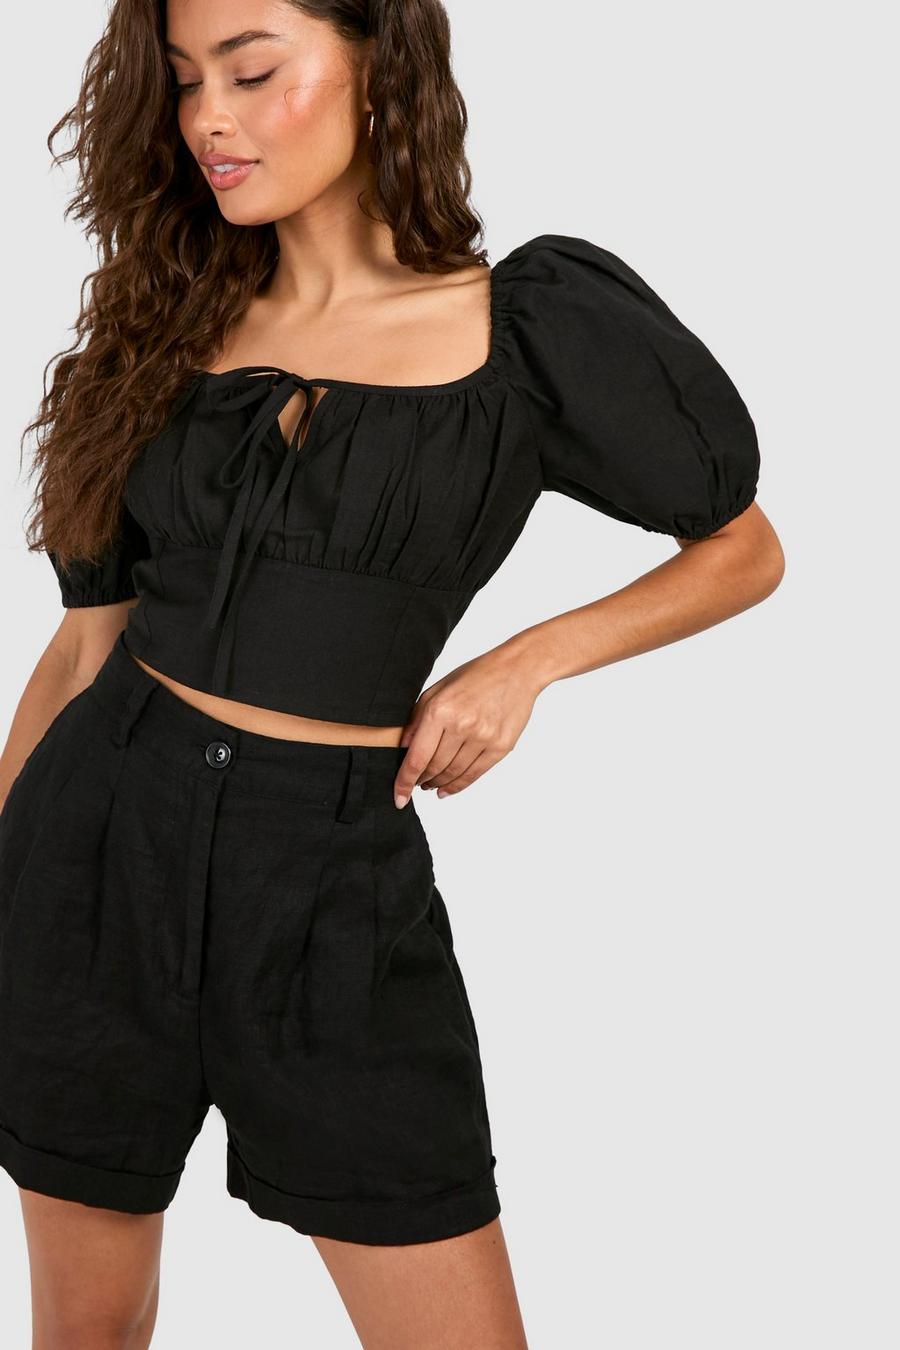 Black Linen Ruched Milkmaid Top